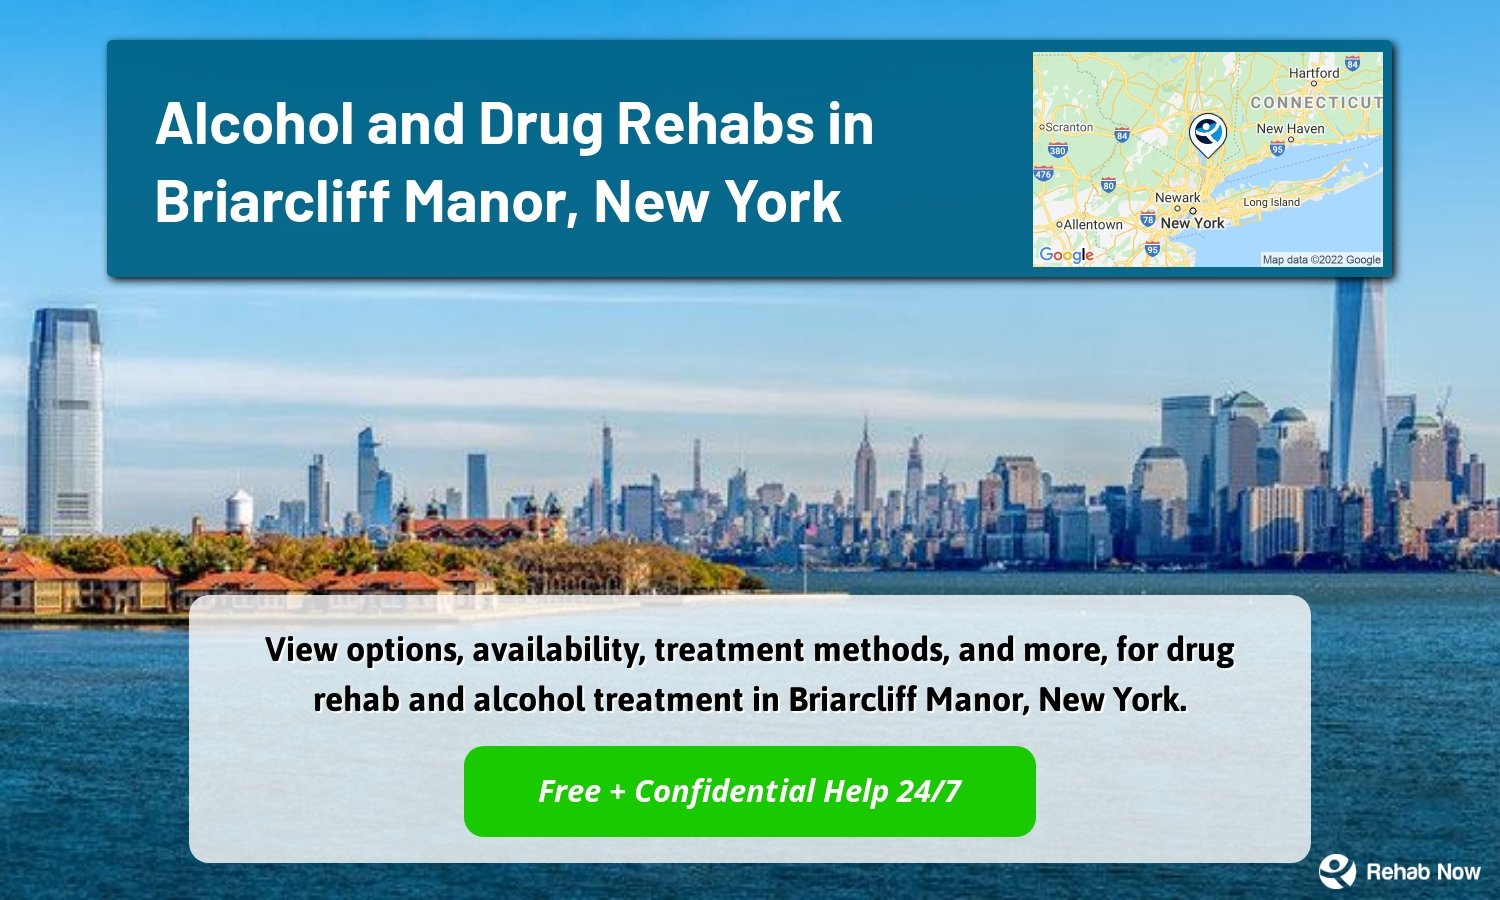 View options, availability, treatment methods, and more, for drug rehab and alcohol treatment in Briarcliff Manor, New York.